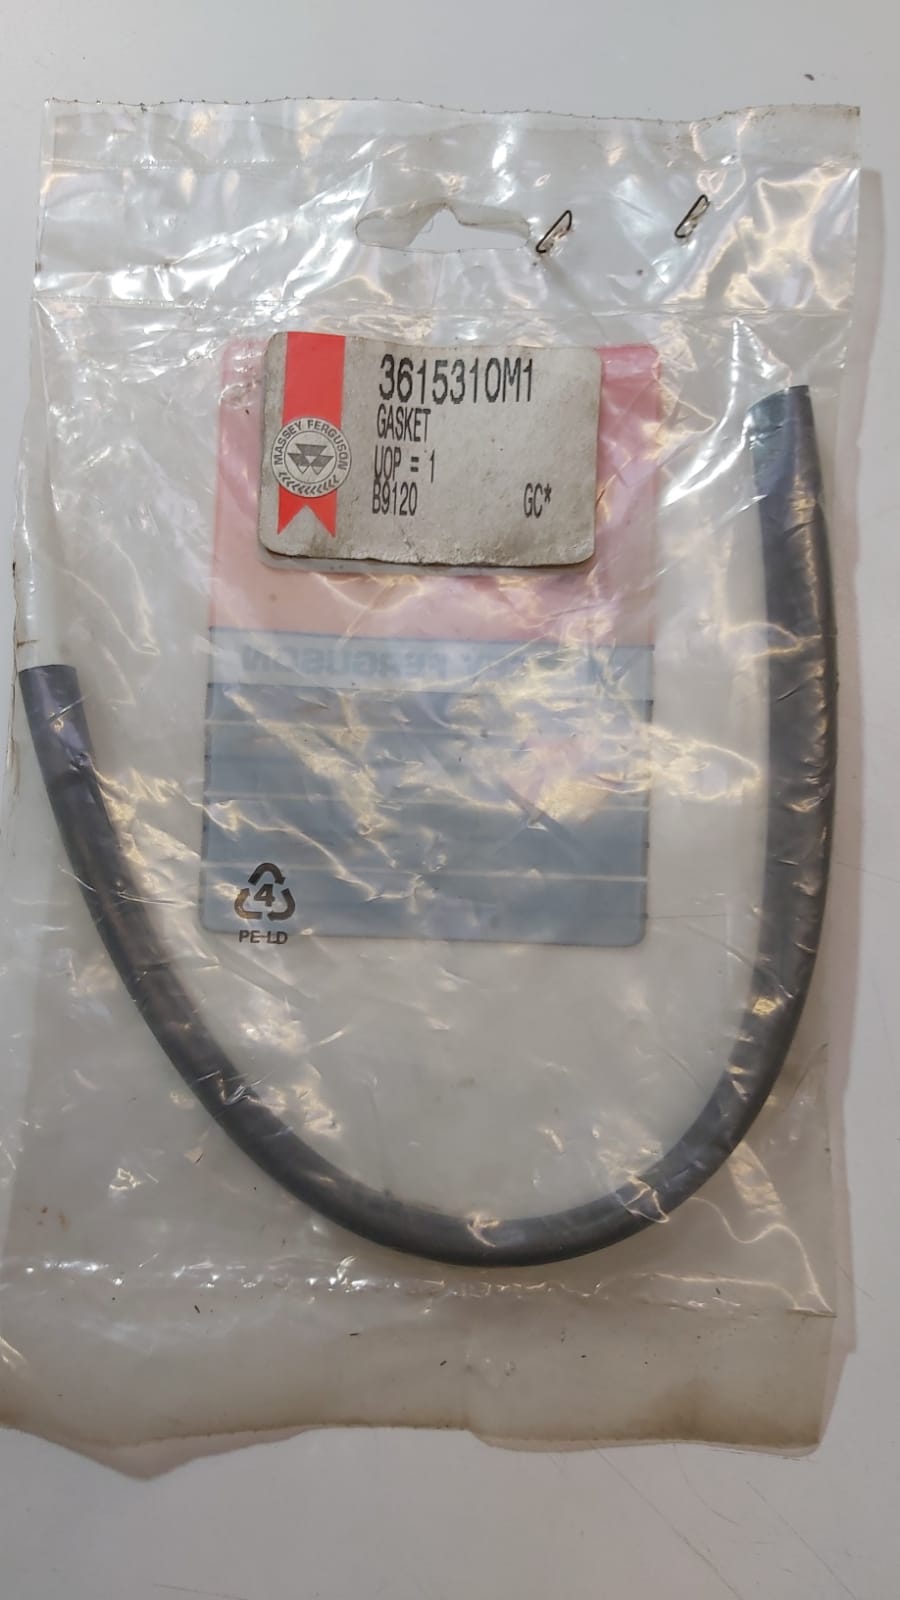 rubber-seal-3615310m1